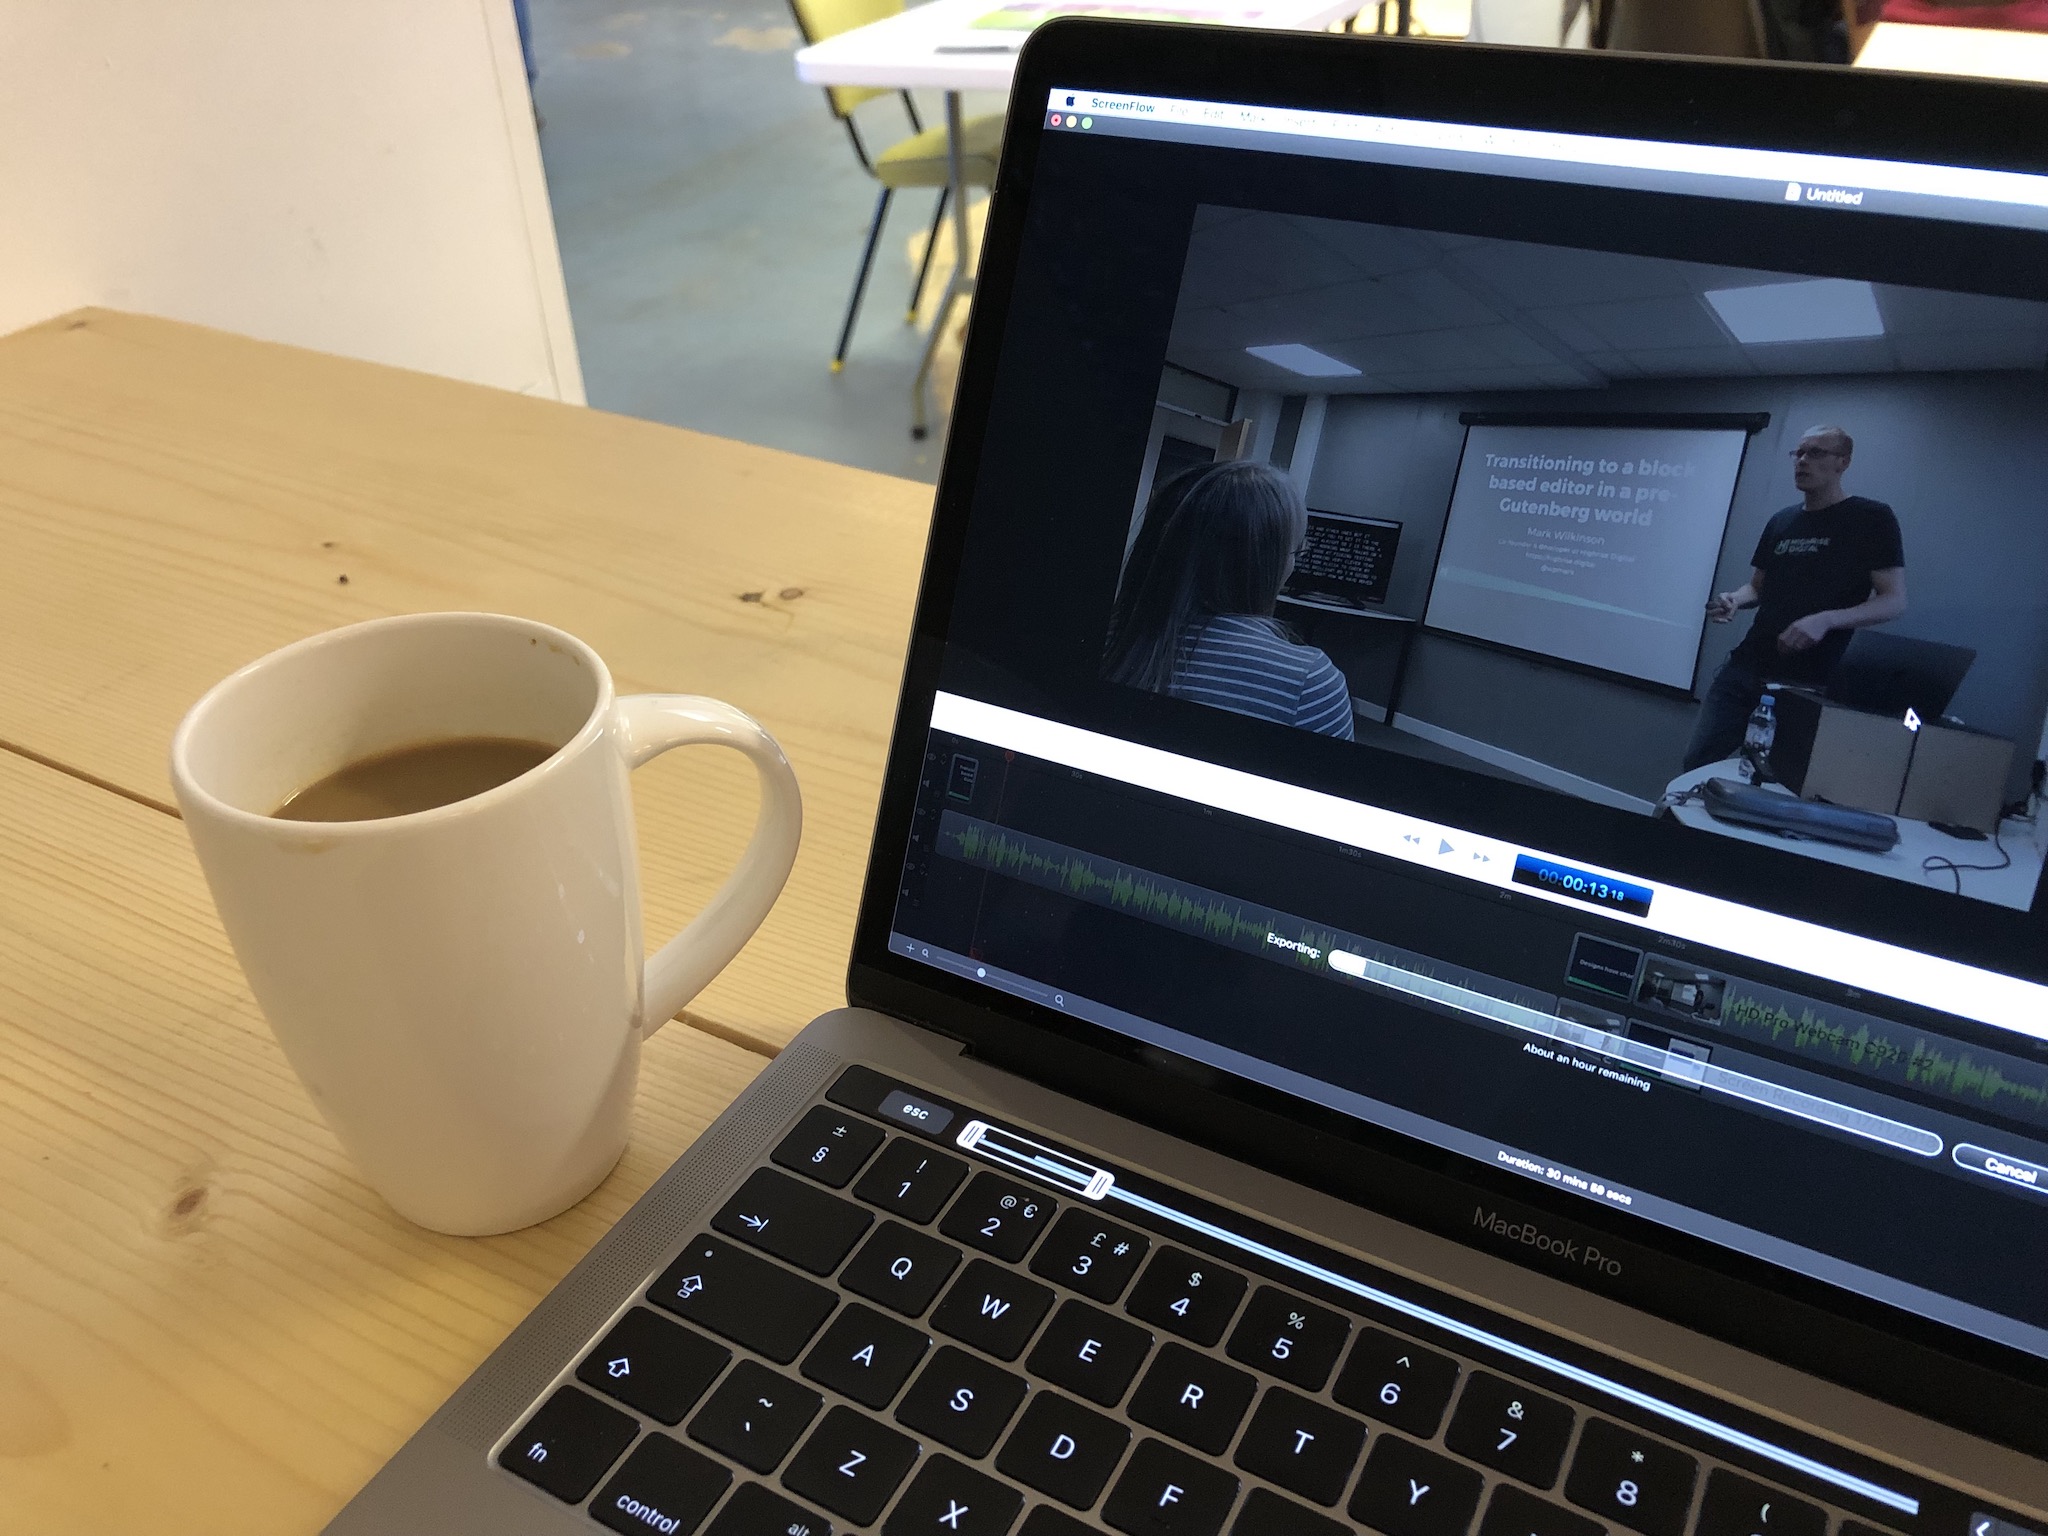 Video editing on a Macbook Pro